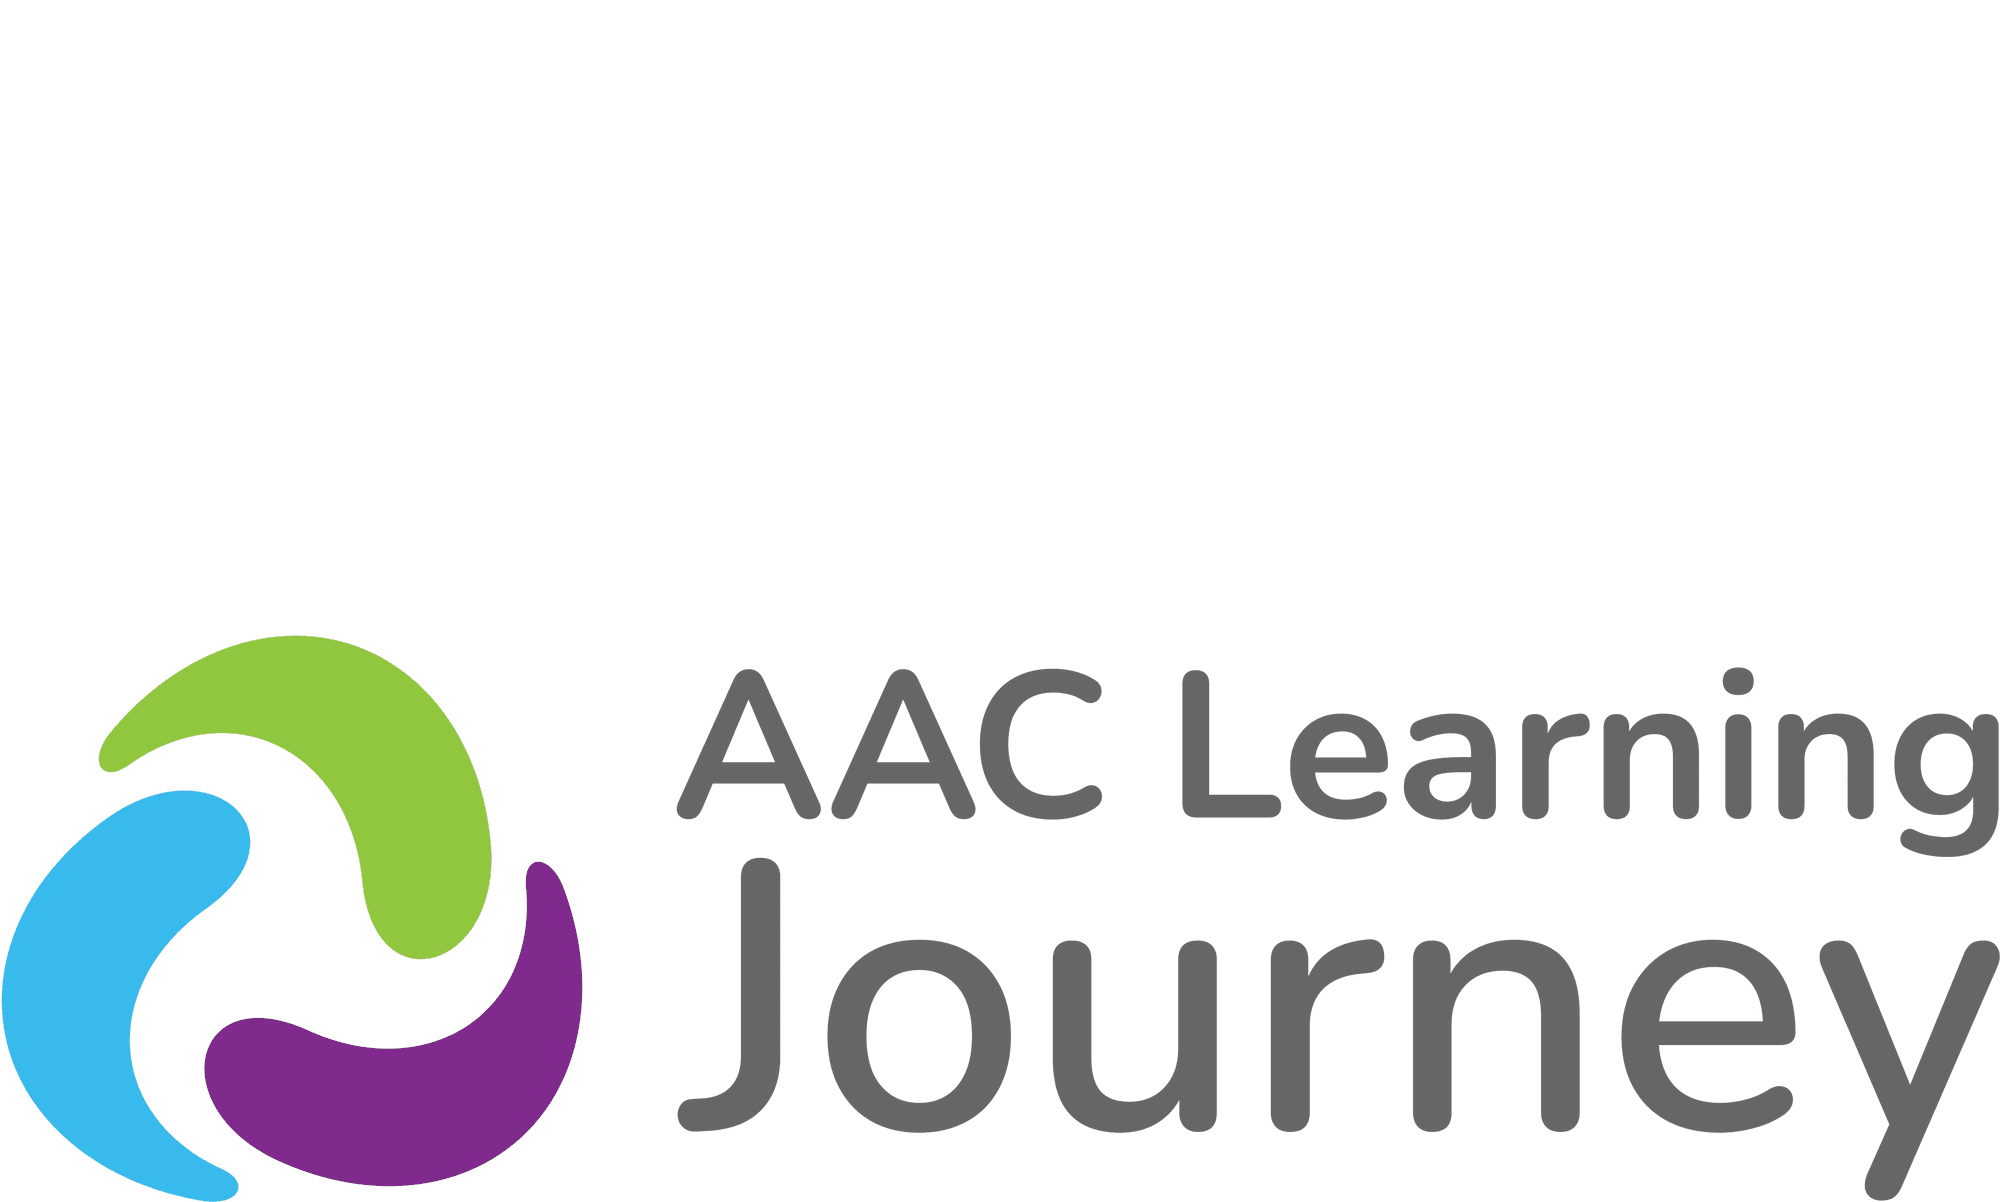 AAC Learning Journey